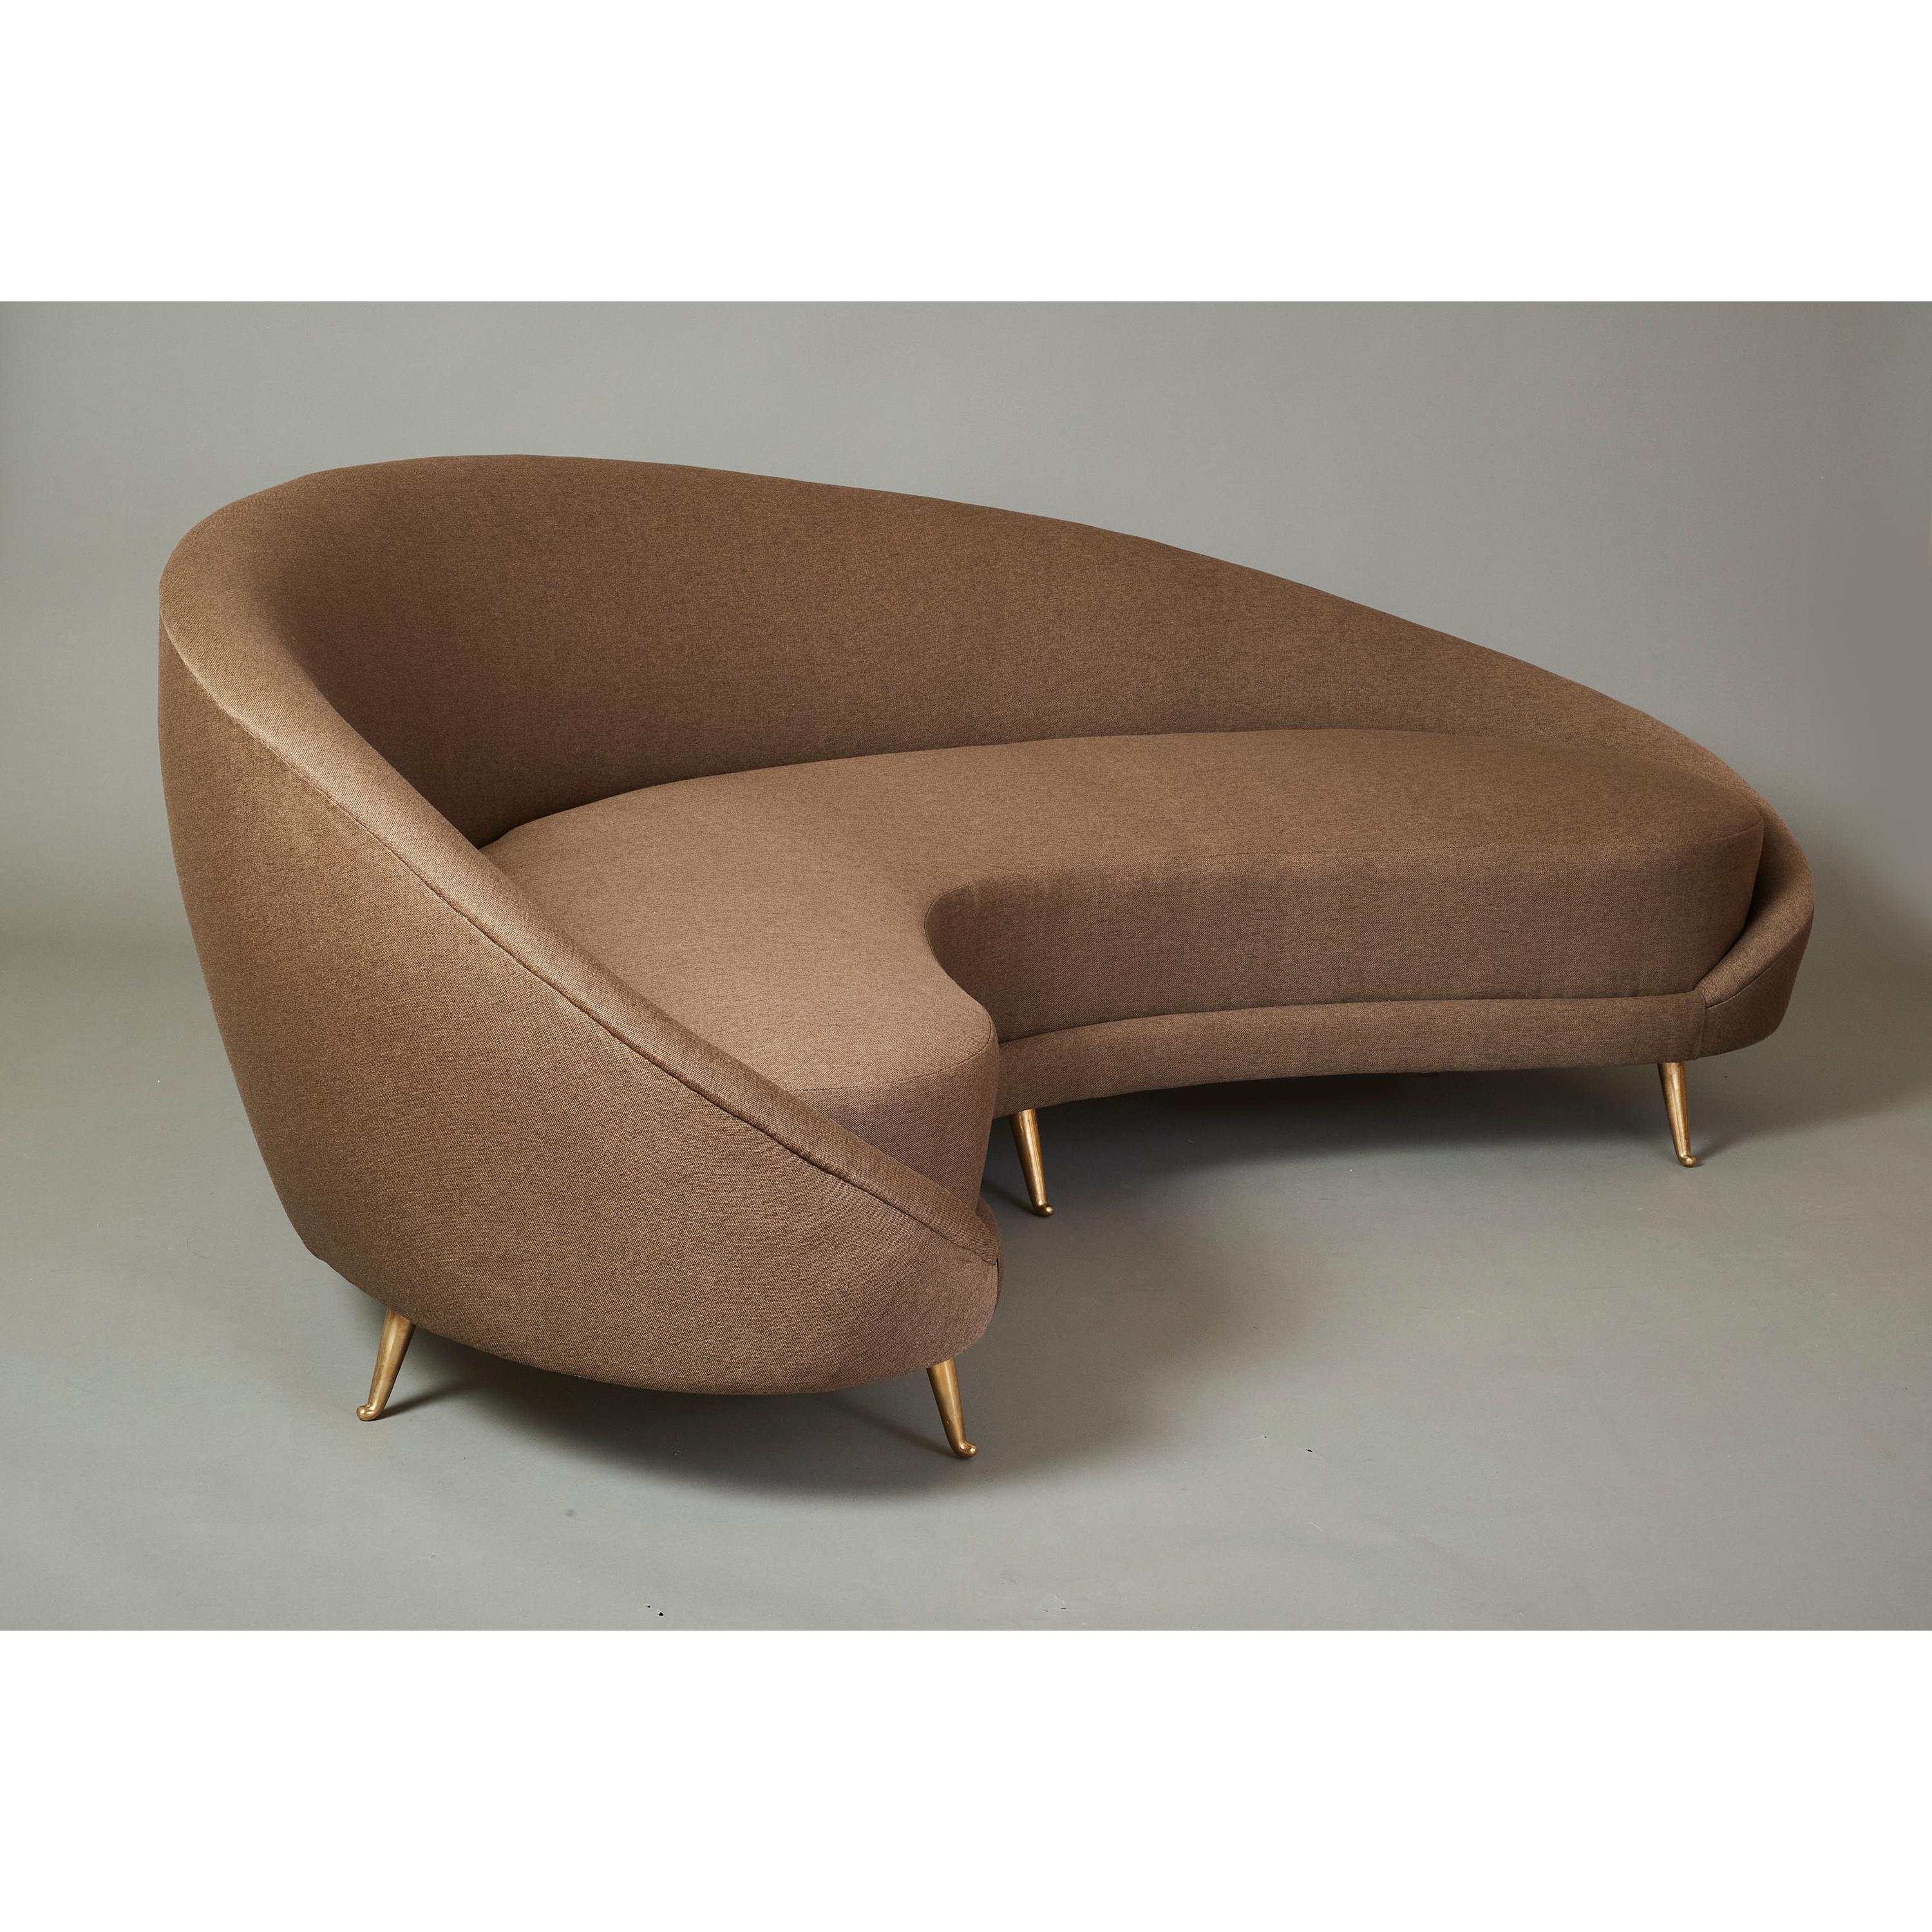 Federico Munari Curved Boomerang Sofa with Polished Brass Legs, Italy 1950's For Sale 5